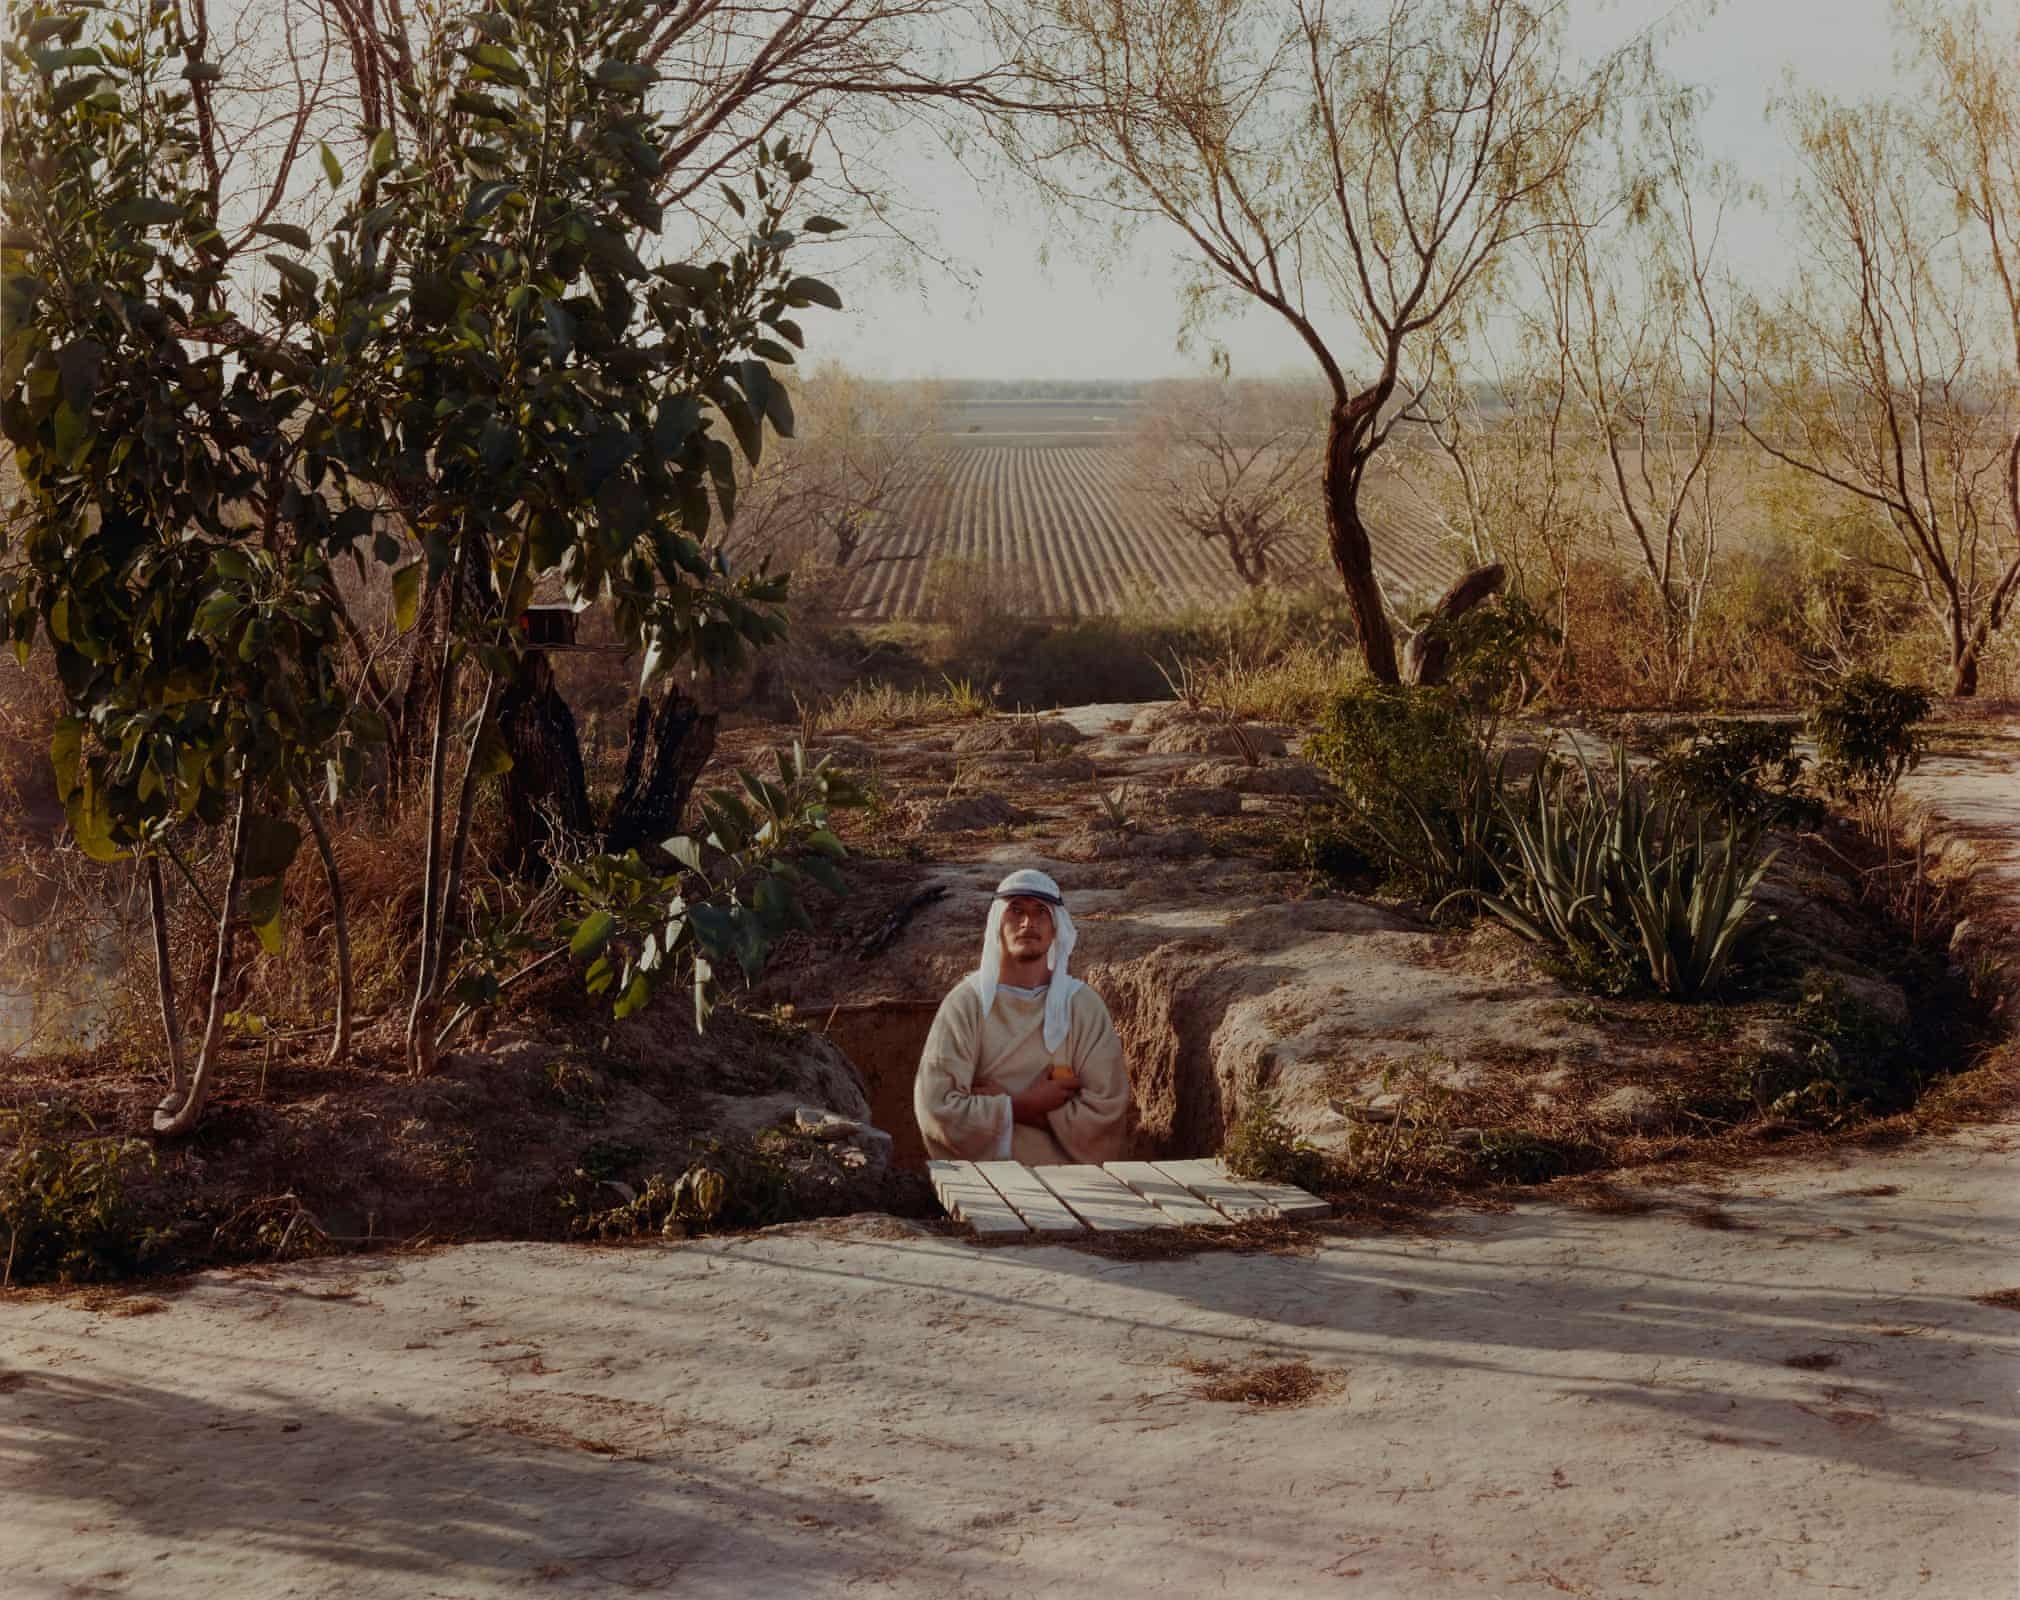 Member of the Christ Family Religious Sect, Hidalgo County, Texas, January 1983